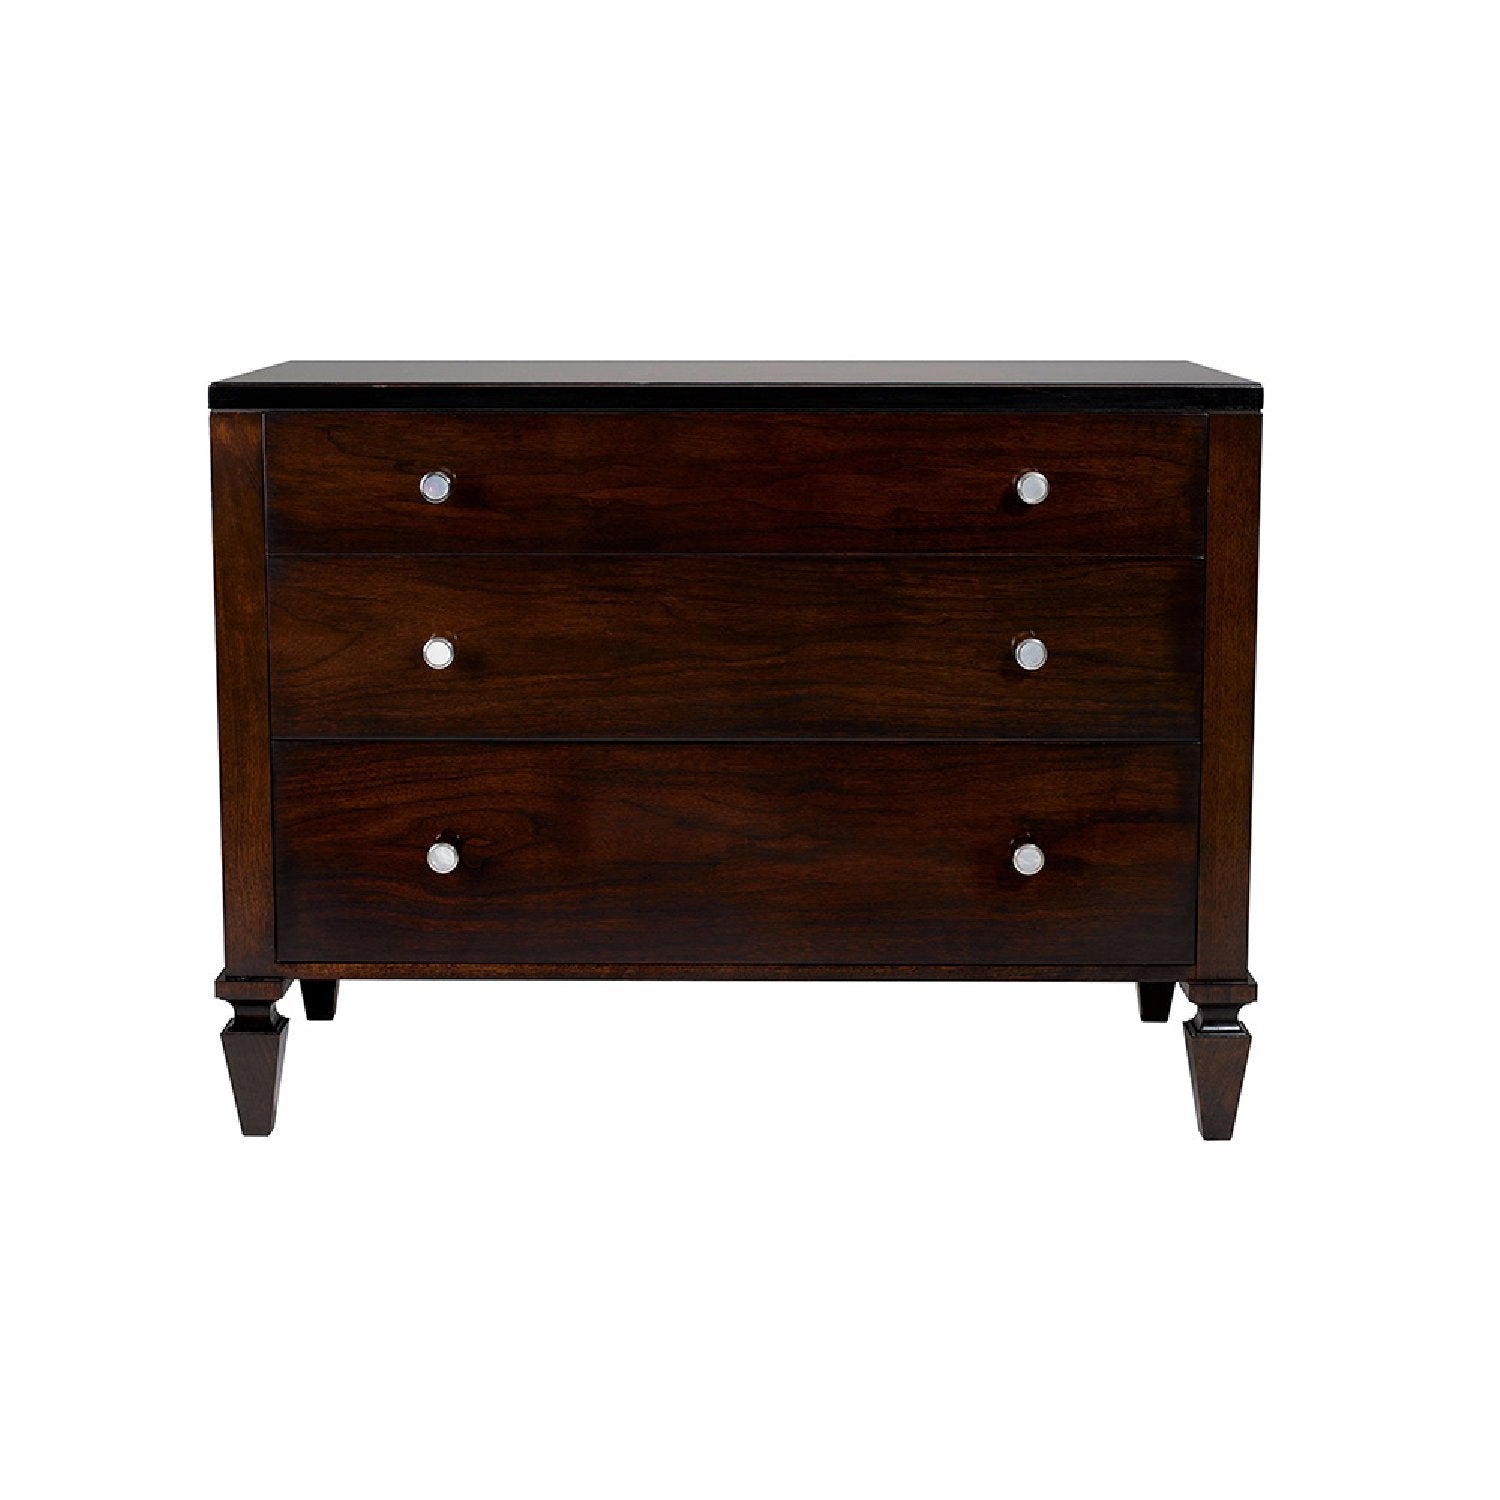 Nina Campbell Charlie Chest of Drawers